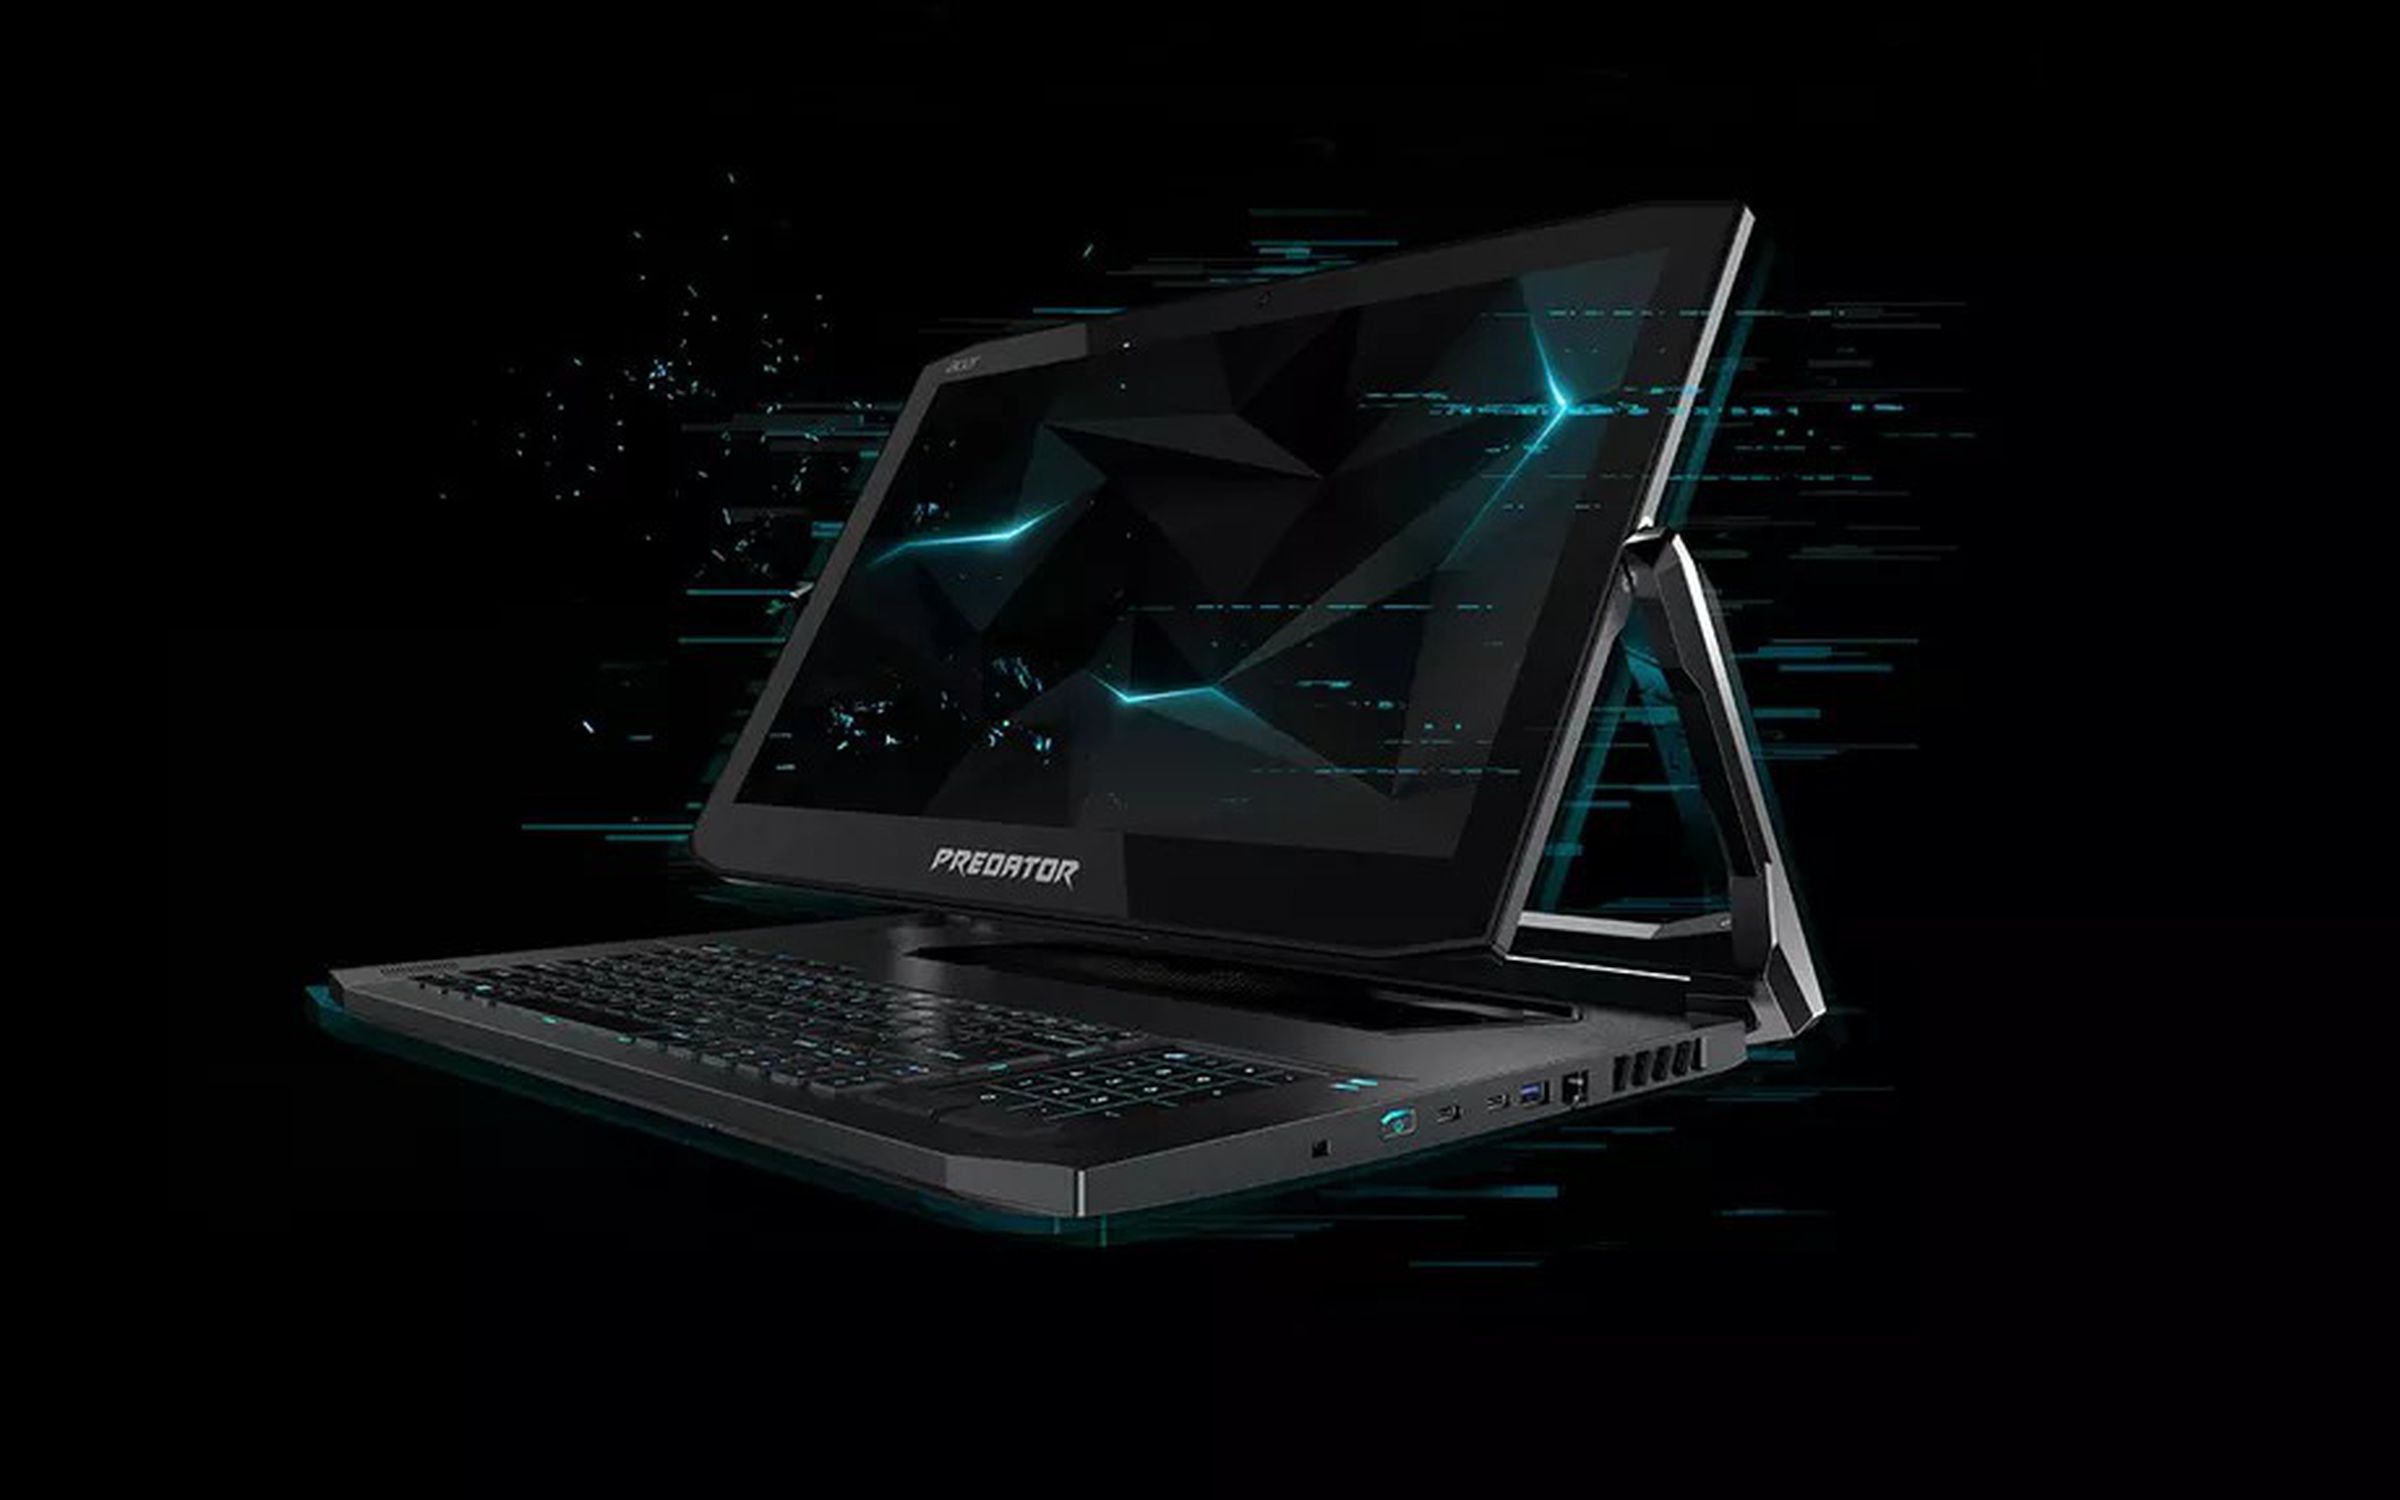 Acer made some big announcements at IFA 2018, including this convertible 2-in-1 gaming laptop.